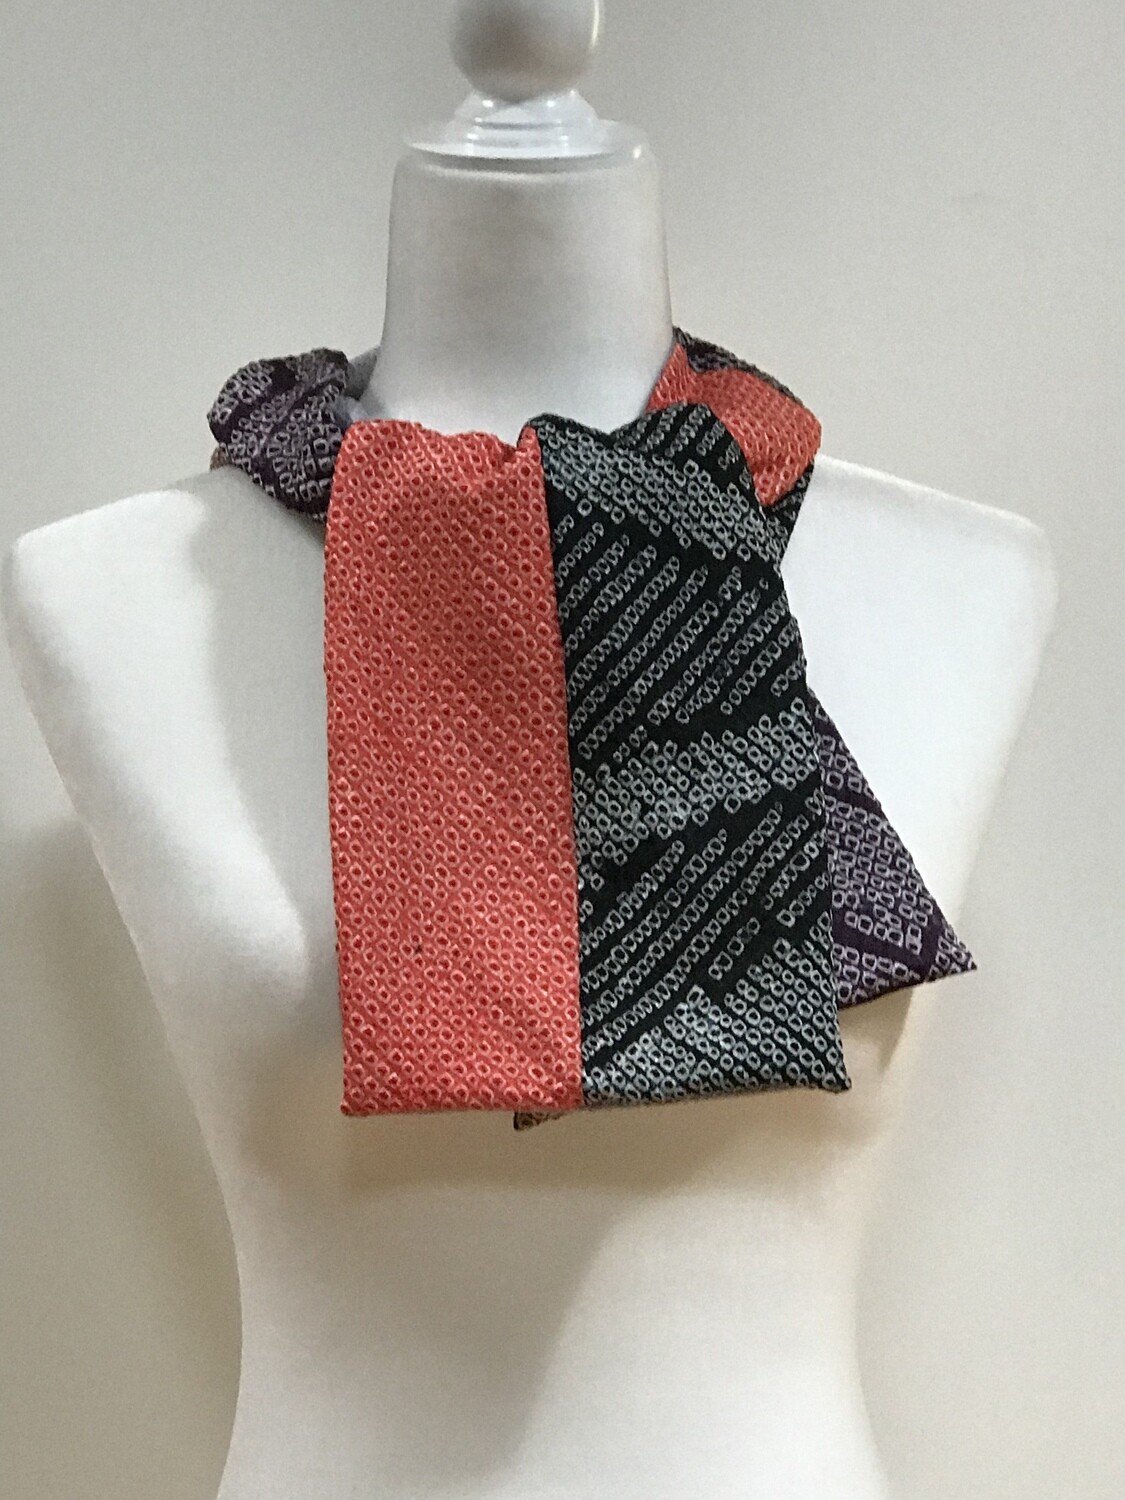 Scarf
6.5 x 46in